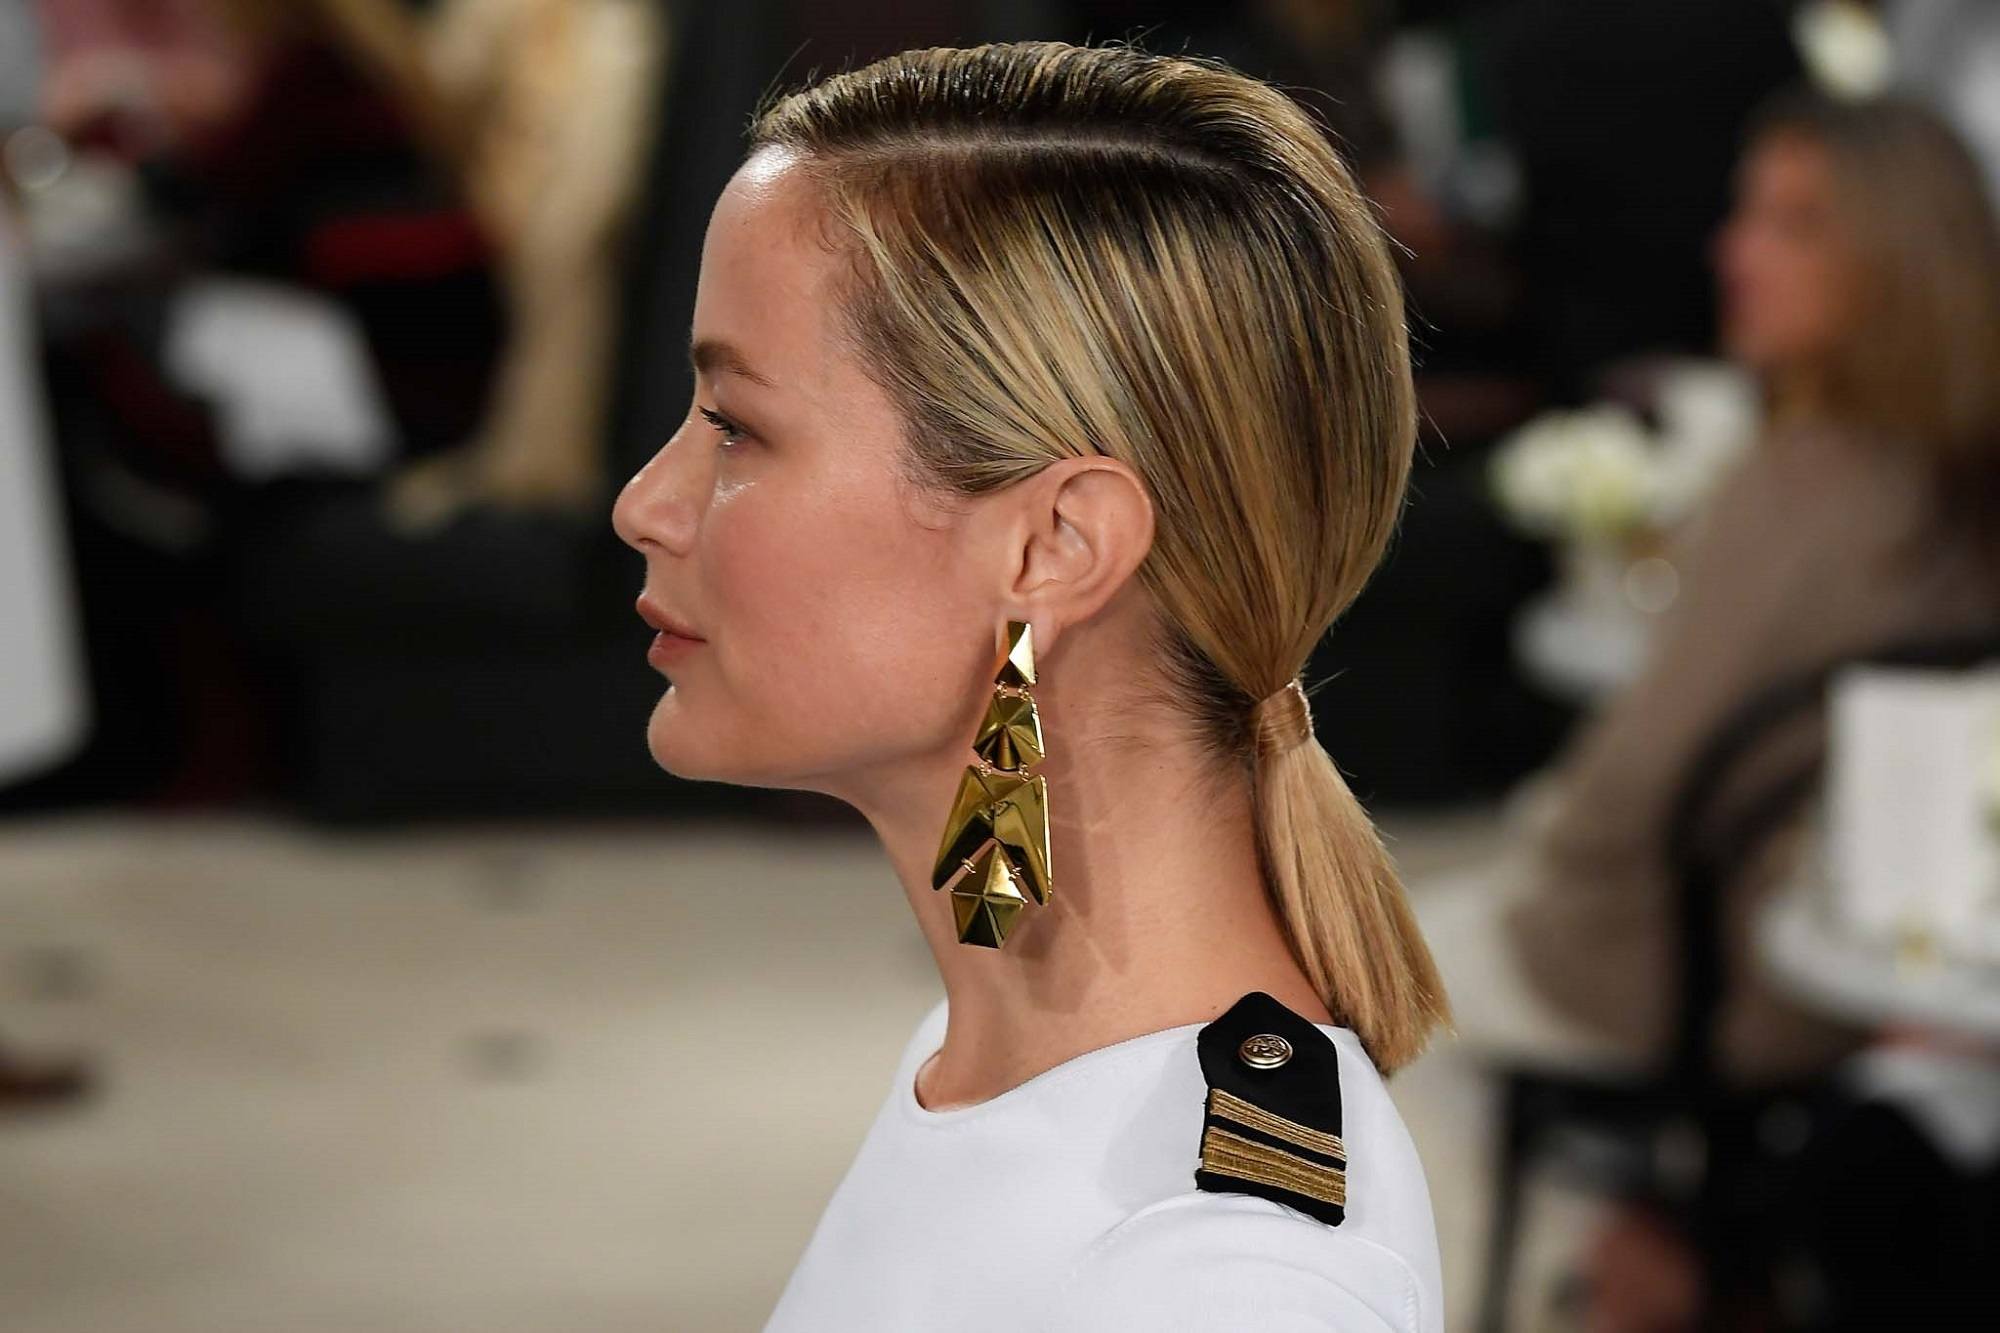 New York Fashion Week Hair: Side view shot of a woman with straight blonde hair in a ponytail wearing big earrings and white top